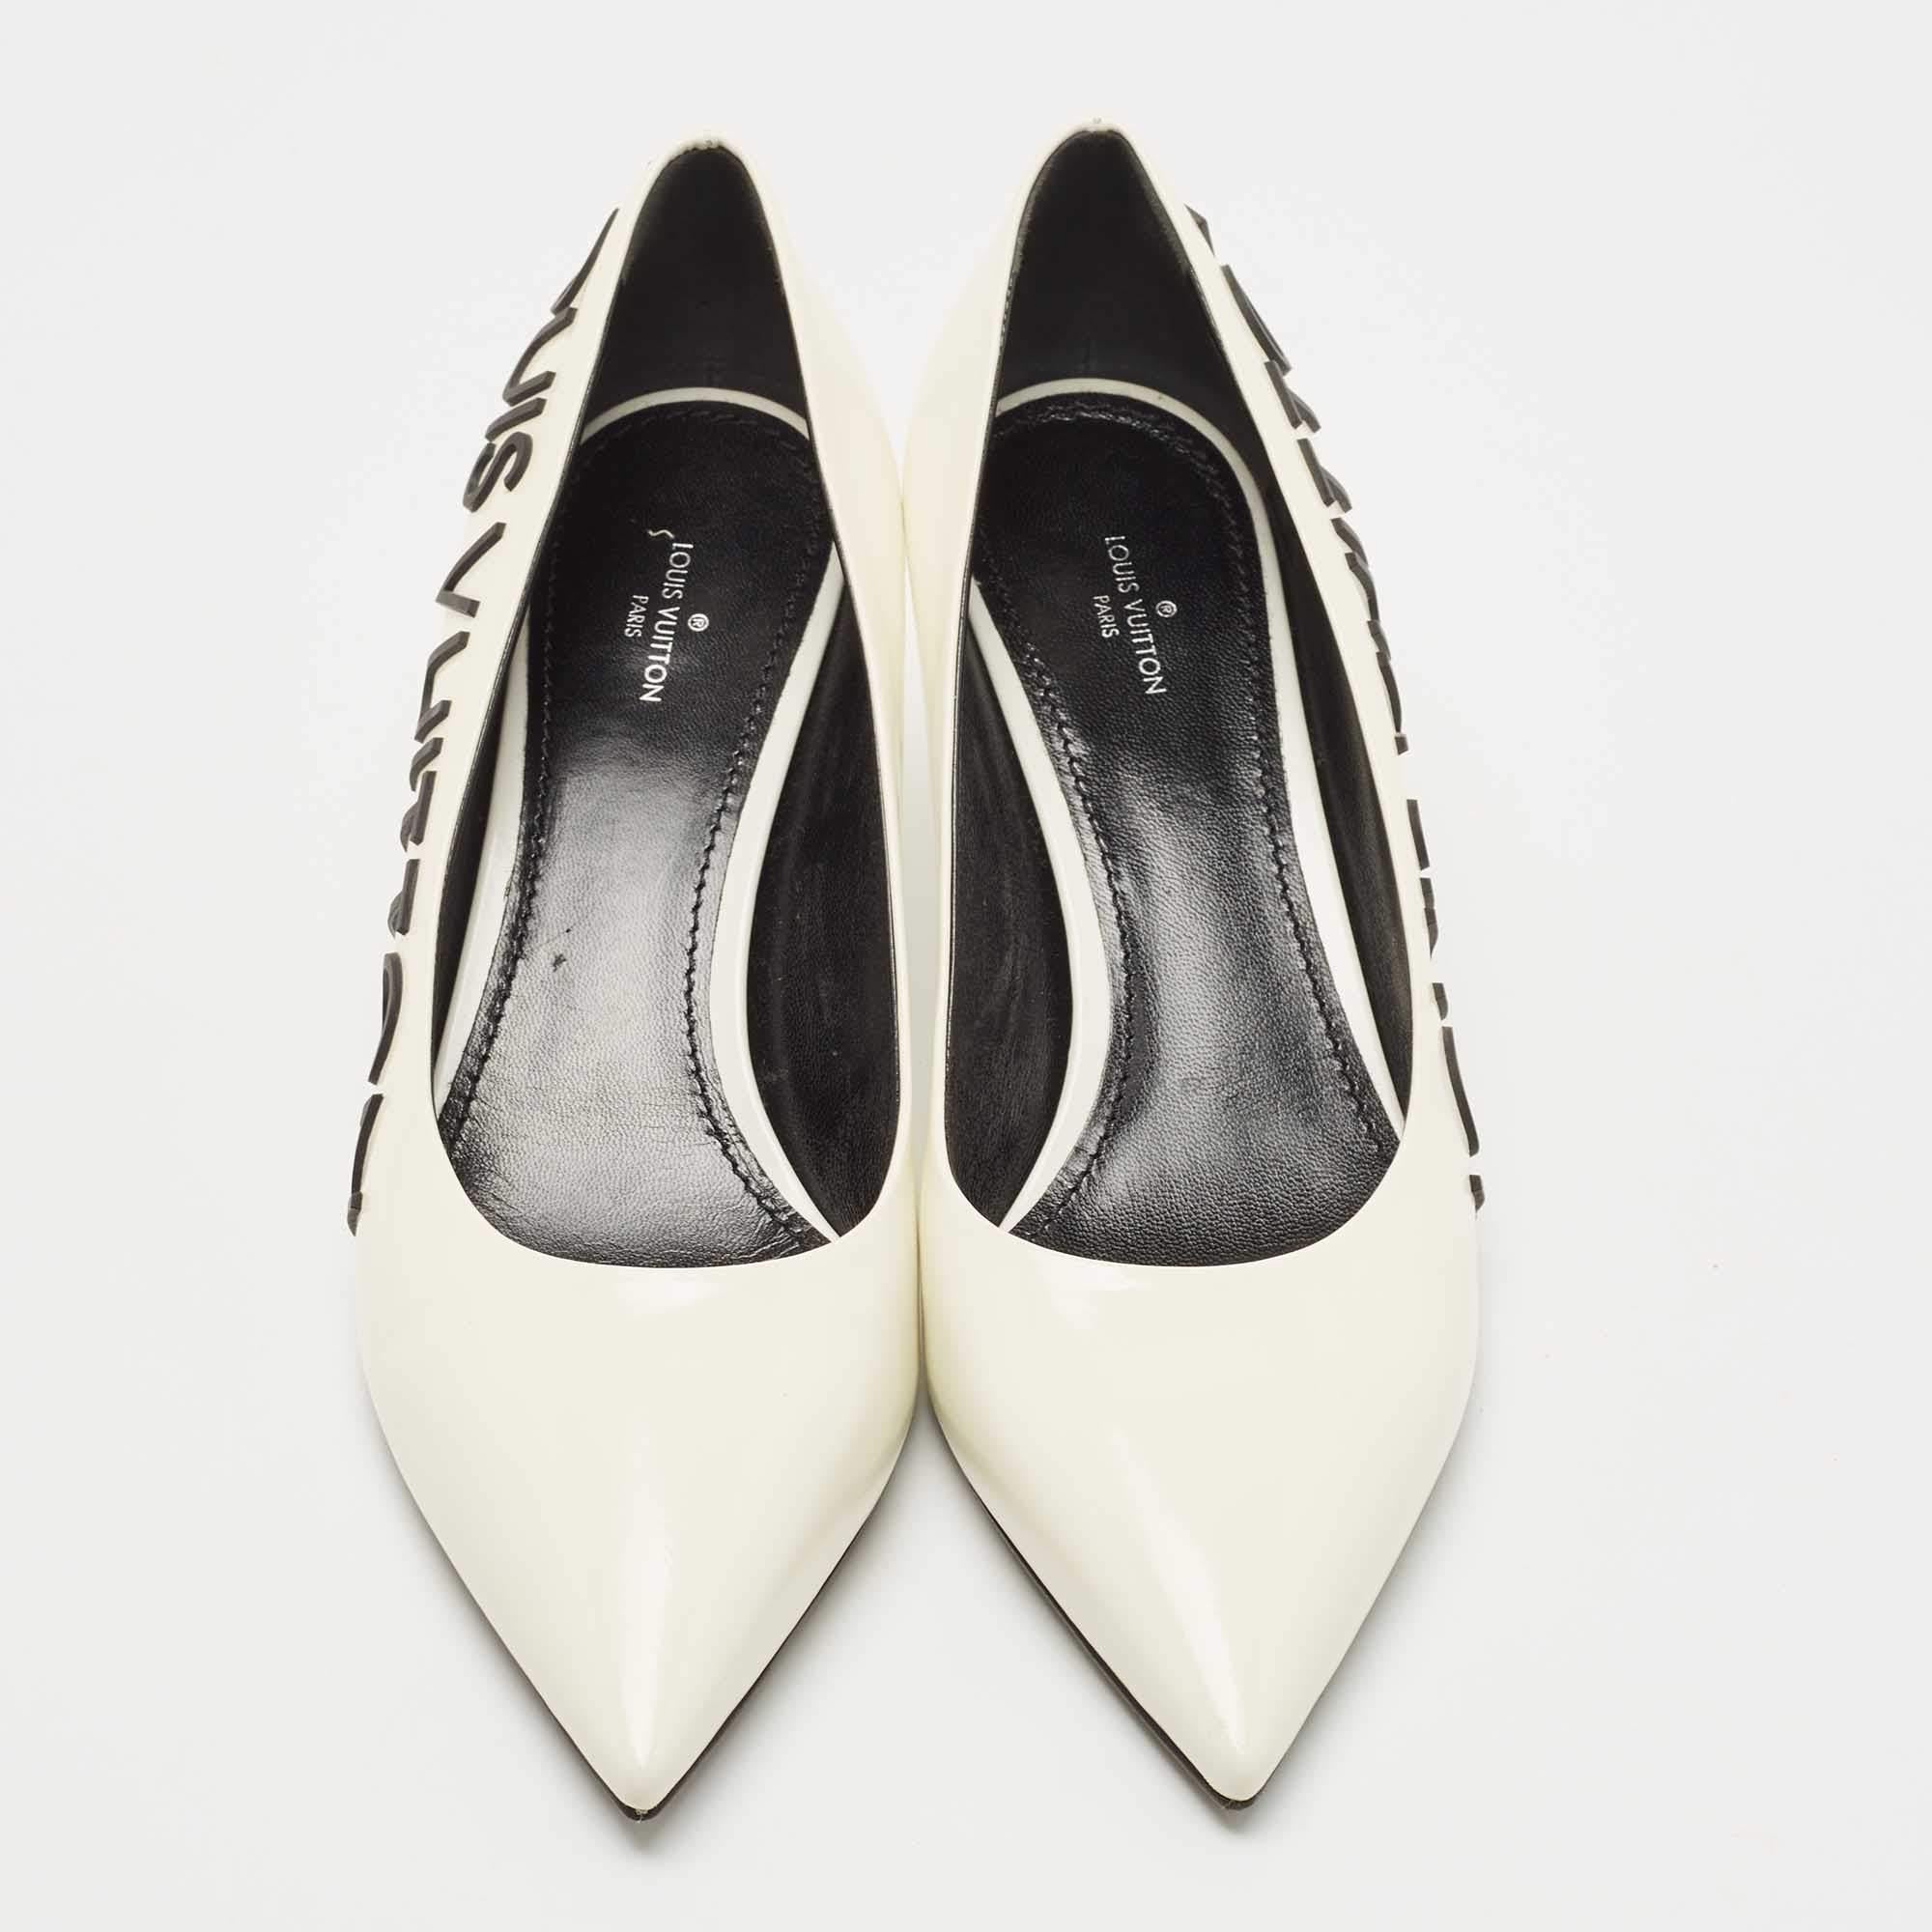 Exhibiting a chic silhouette enhanced with excellence, this pair of pumps from the House of Louis Vuitton exude signatory style! They are designed using cream patent leather on the exterior. These shoes have slim heels, pointed-toes, and a slip-on